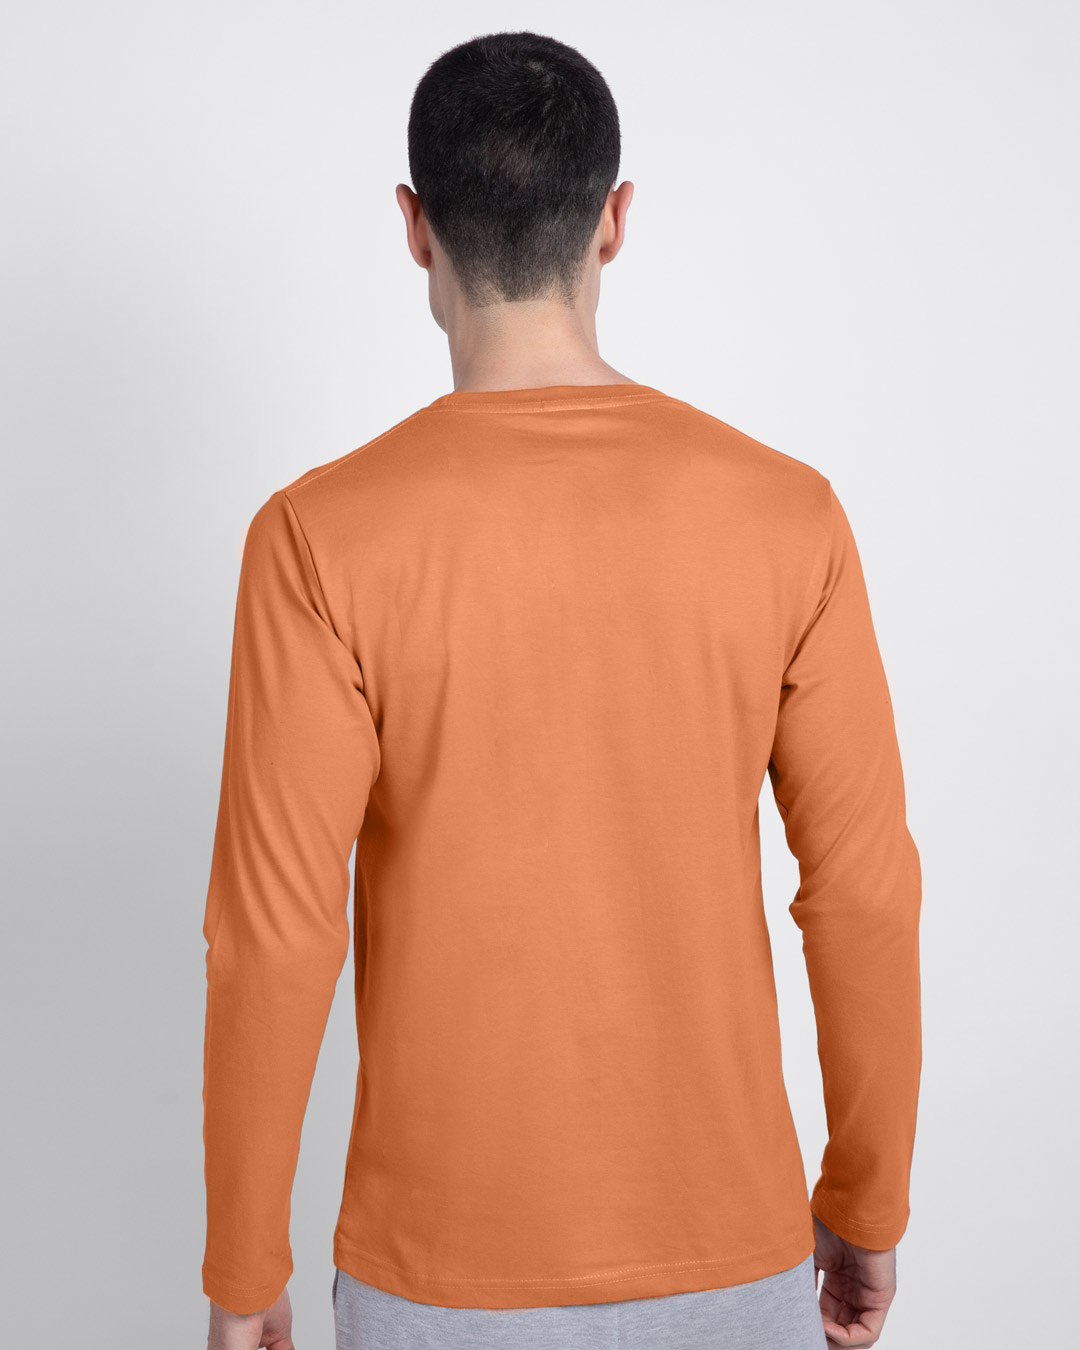 Shop With A Plan Full Sleeve T-Shirt Vintage Oranage-Back